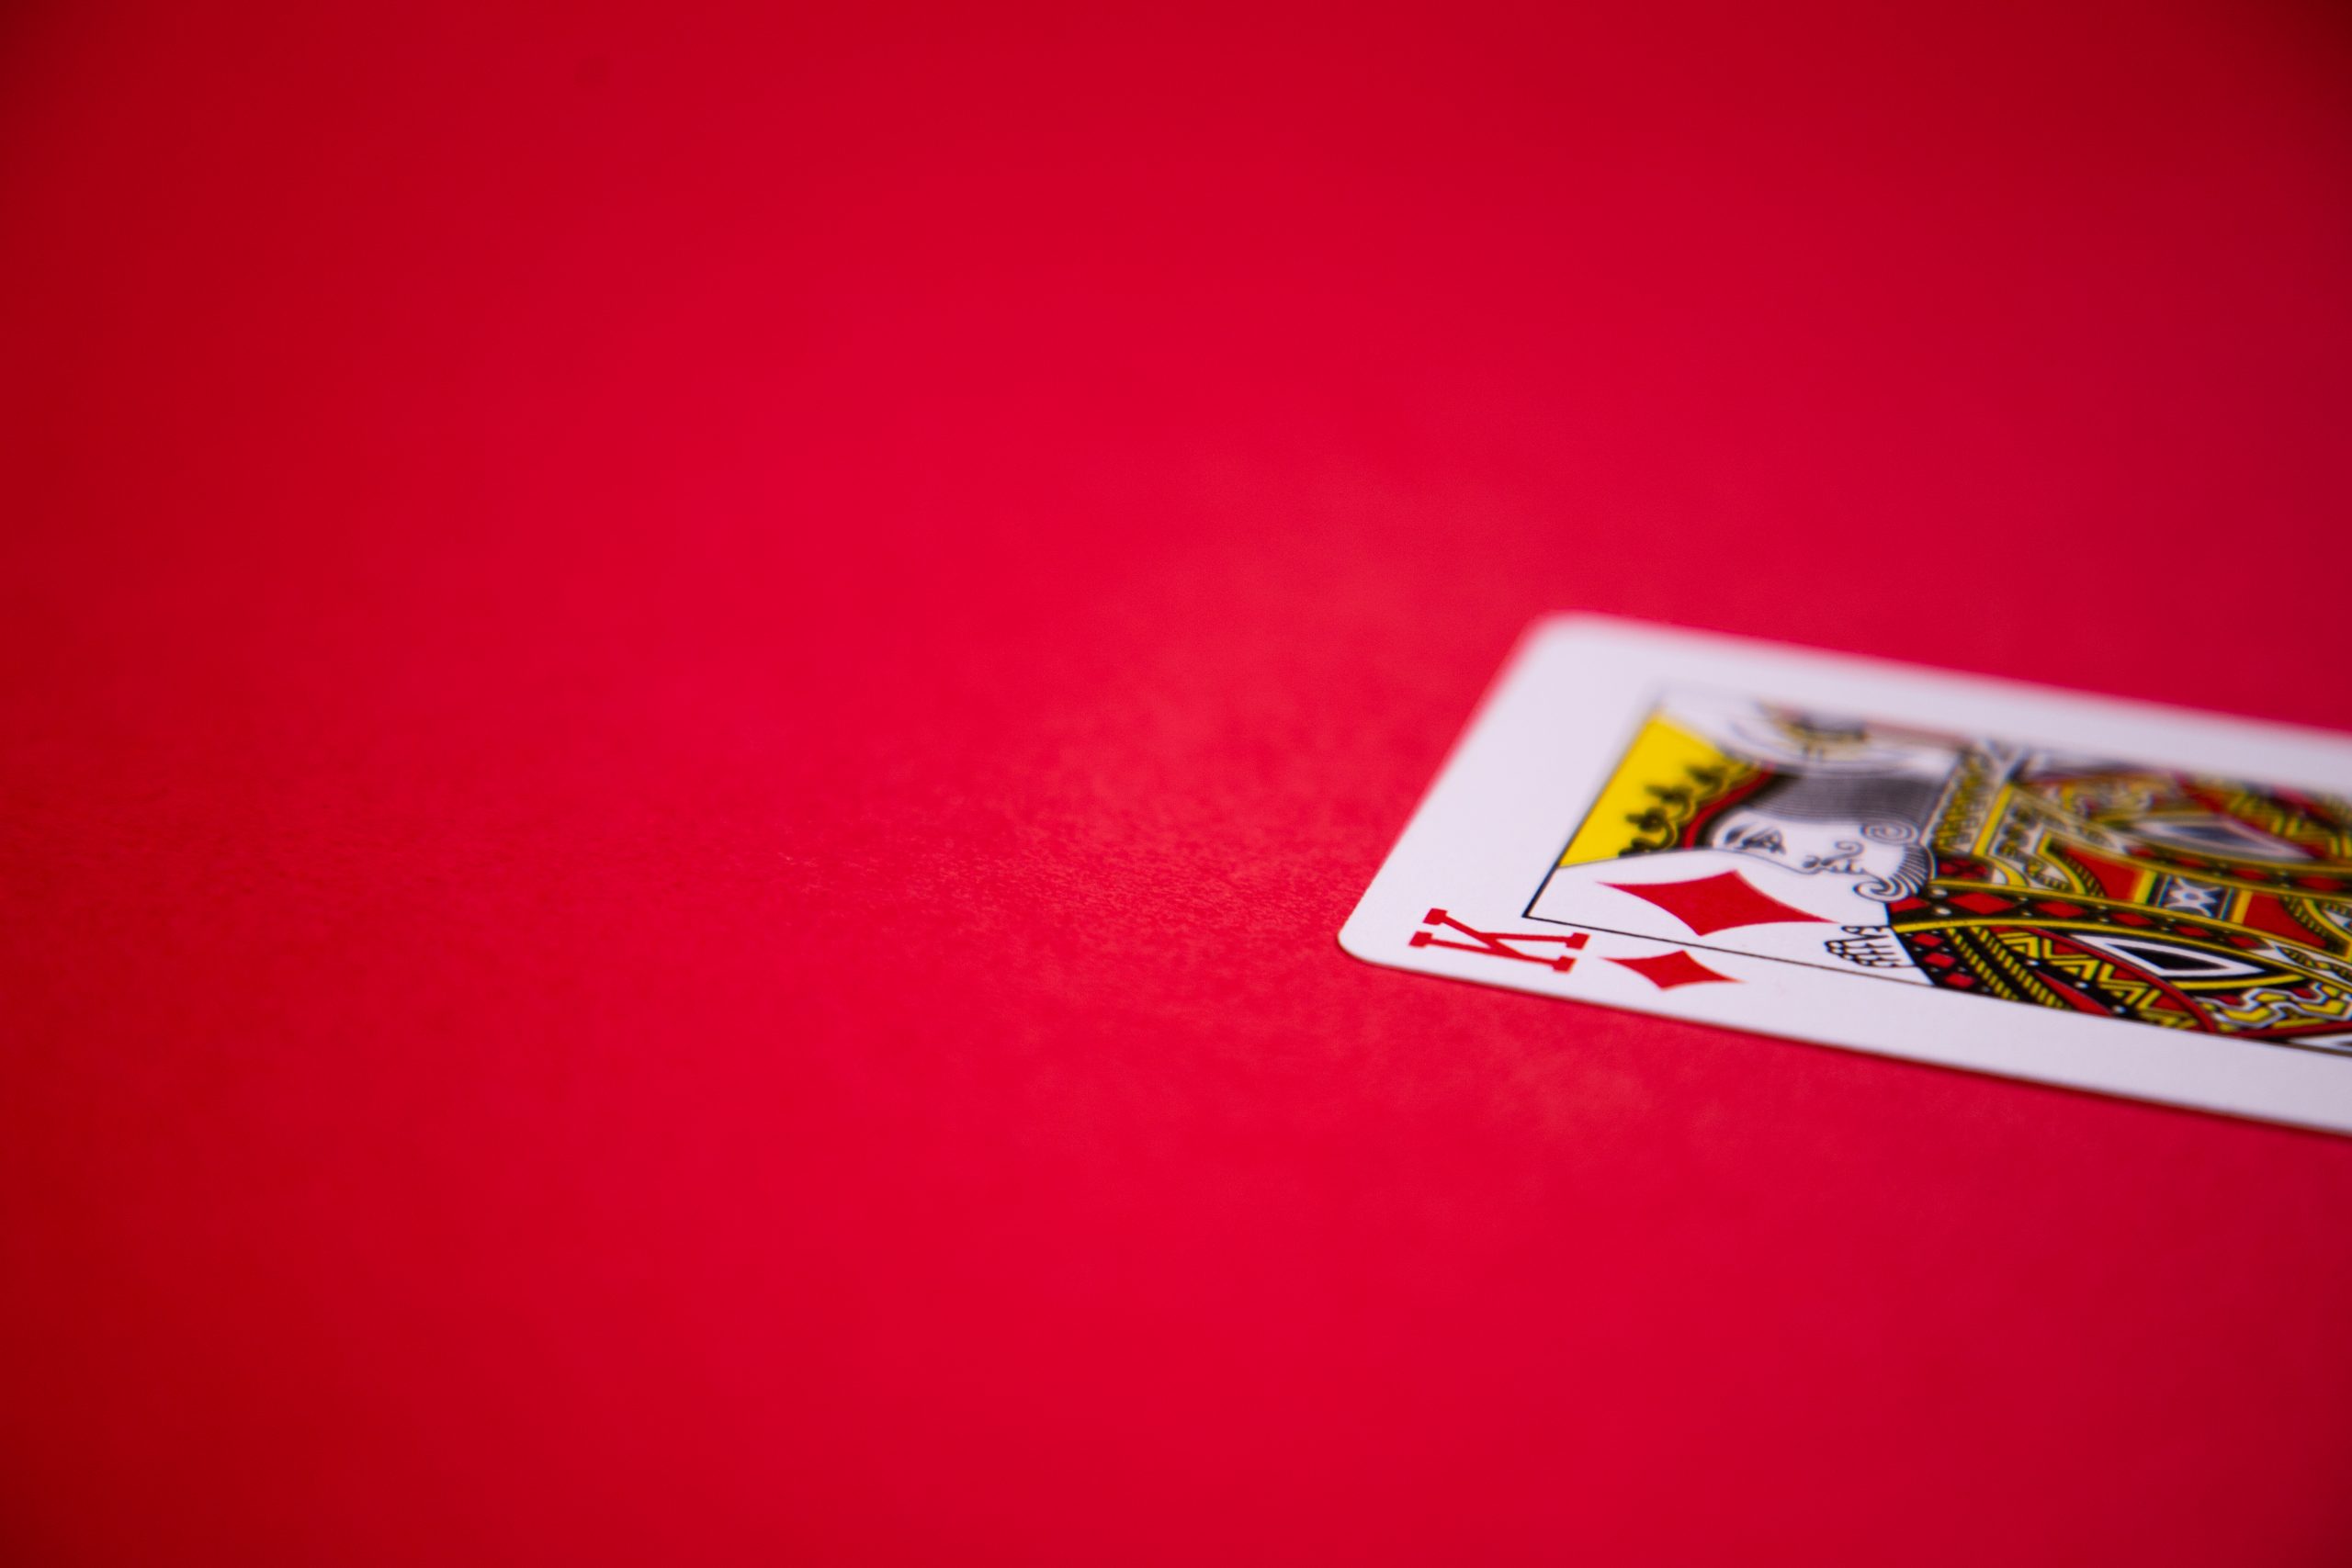 King of diamonds on red background